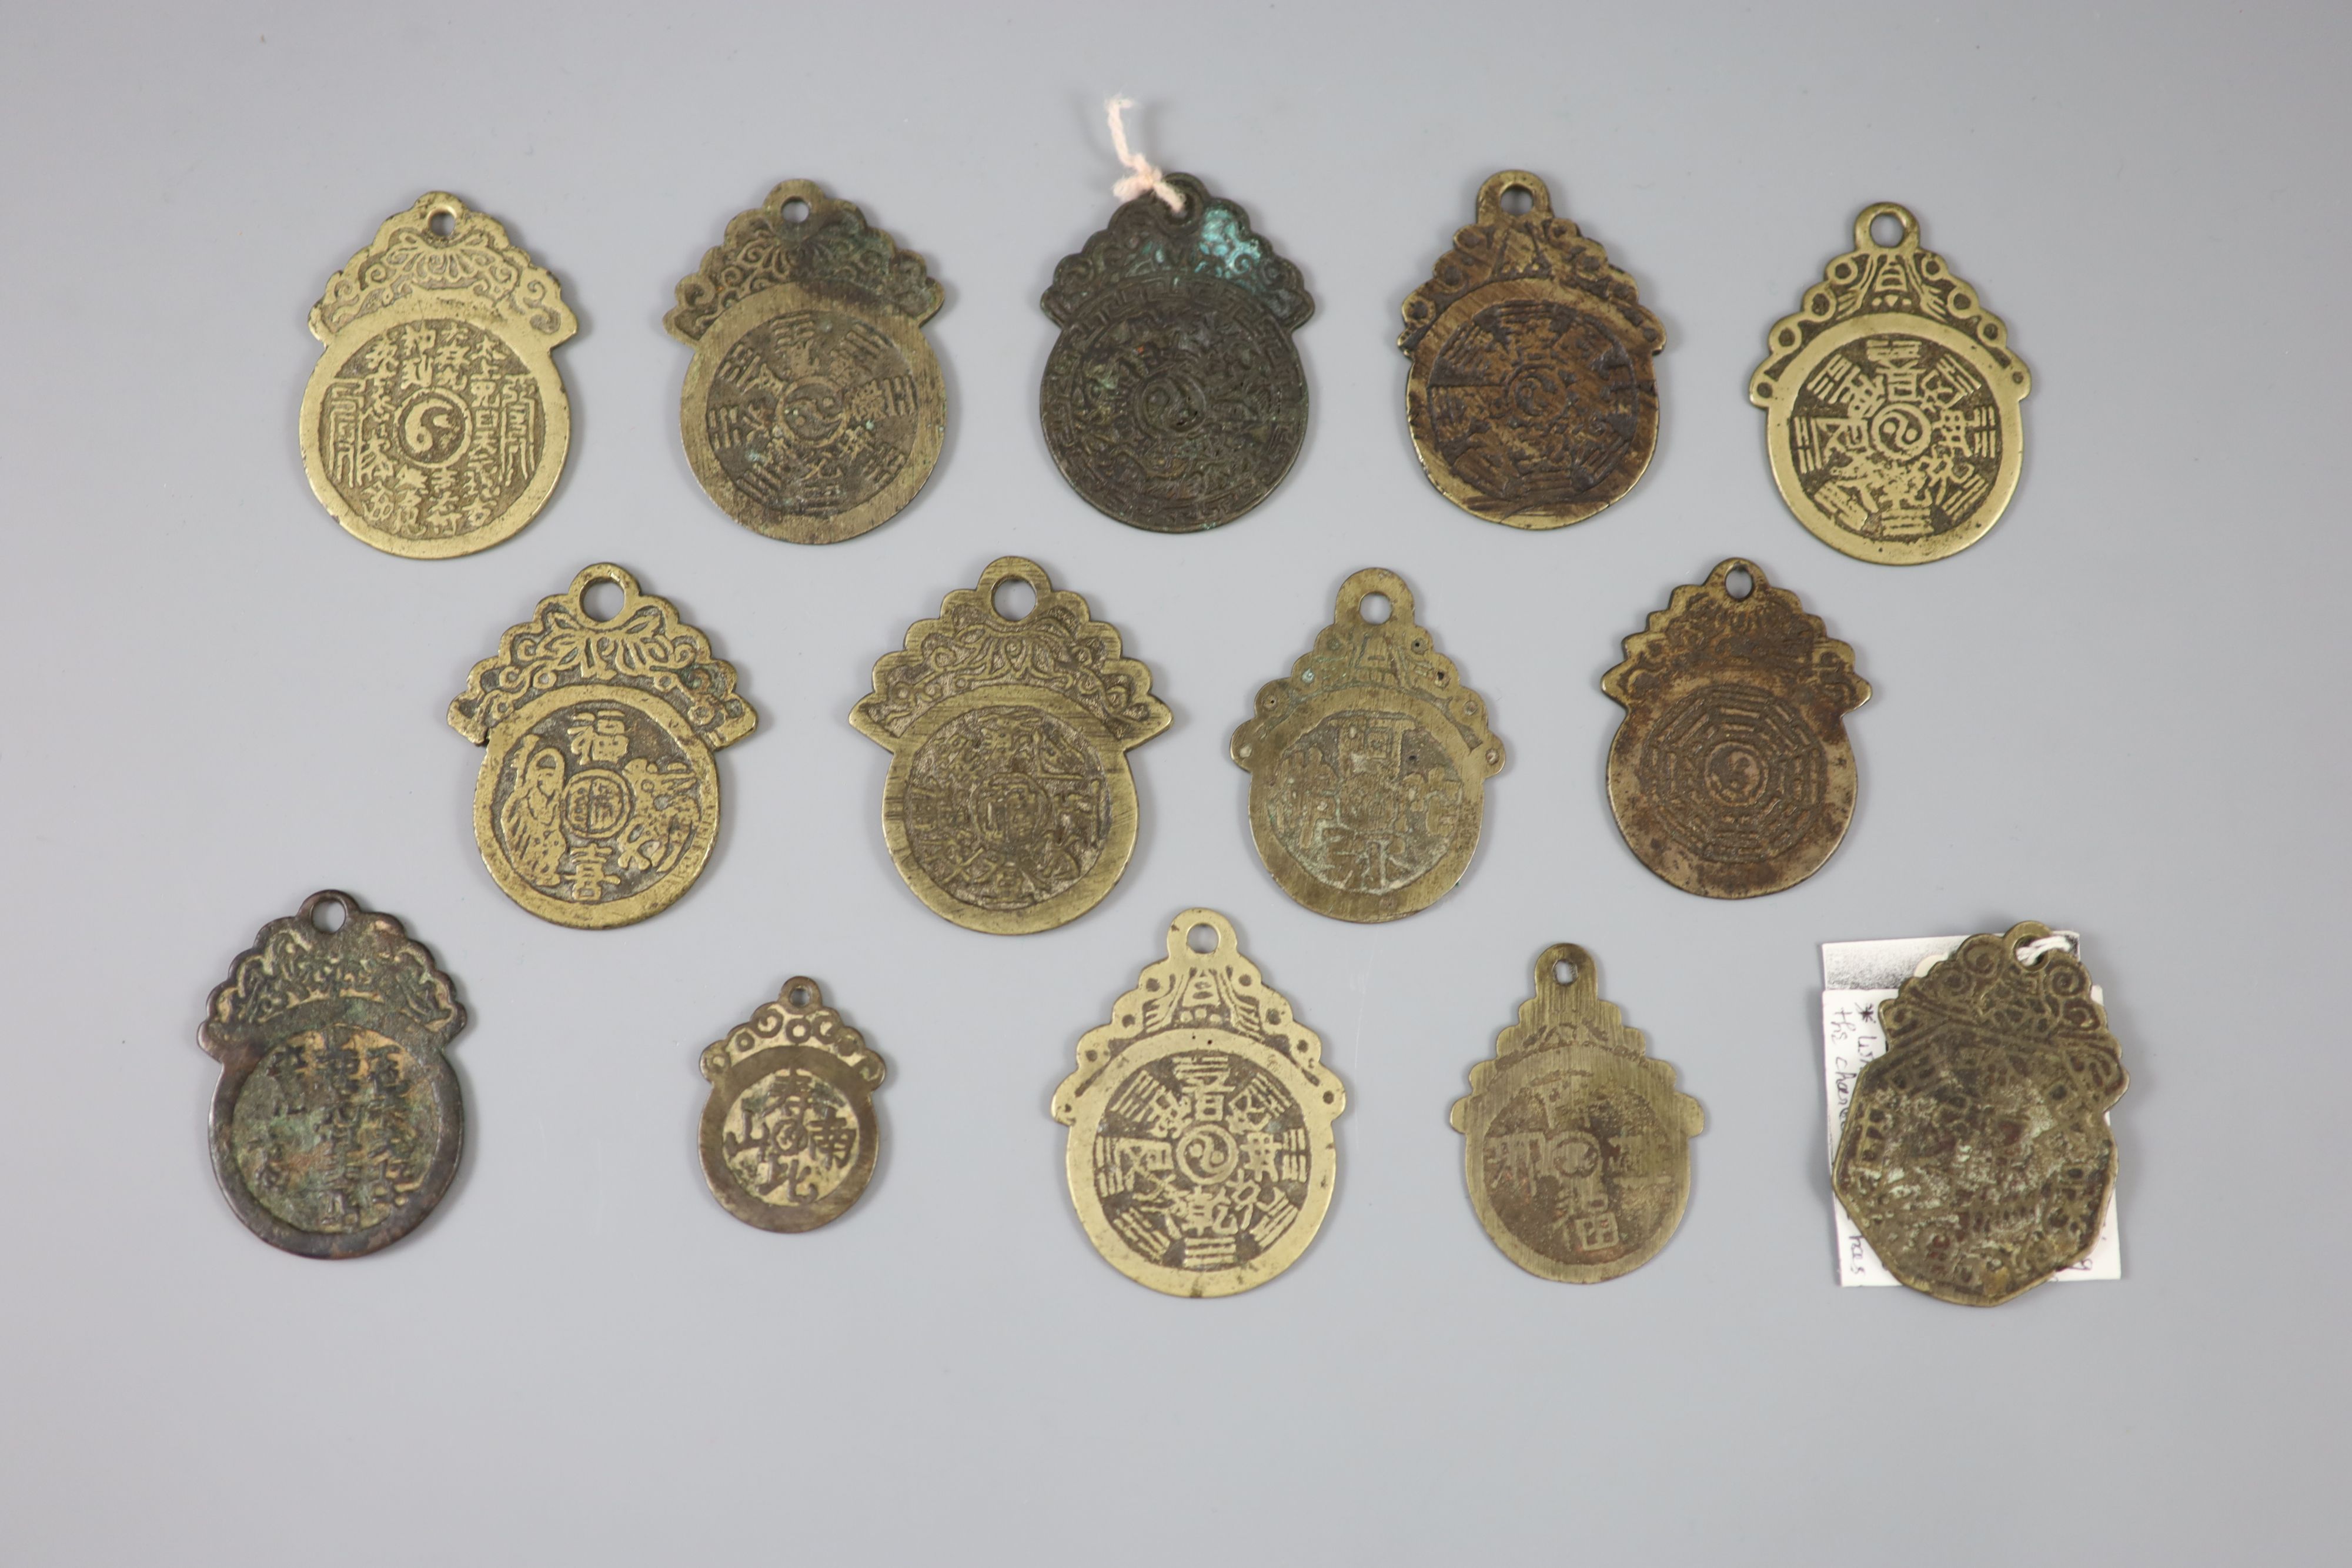 China, 14 bronze pendant charms or amulets, Qing dynasty,